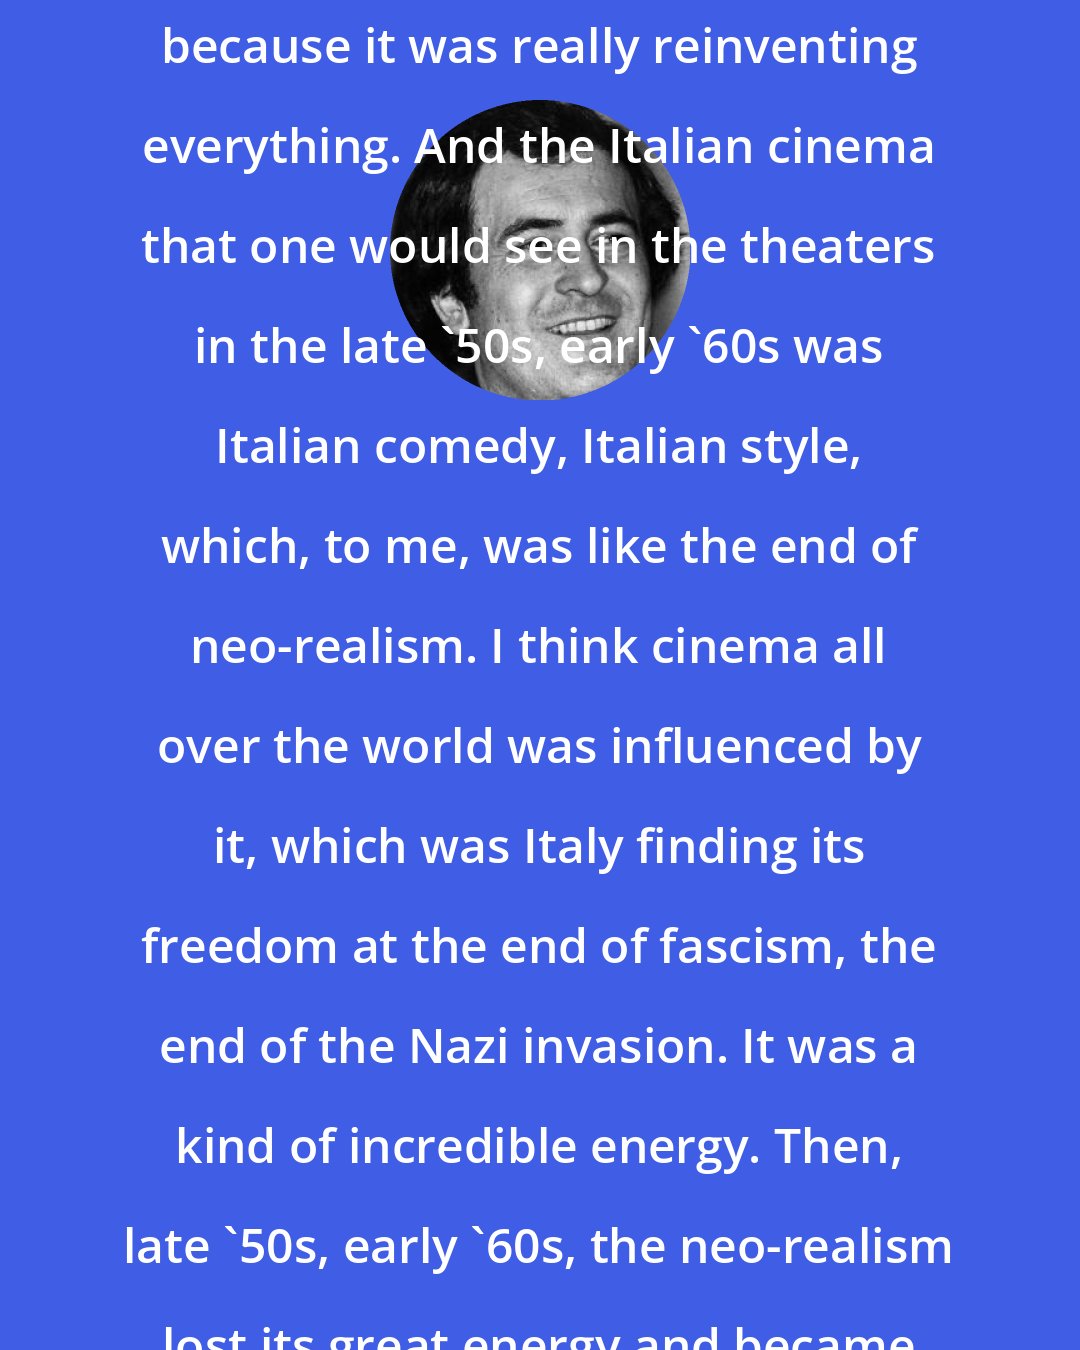 Bernardo Bertolucci: I was seduced by the nouvelle vague, because it was really reinventing everything. And the Italian cinema that one would see in the theaters in the late '50s, early '60s was Italian comedy, Italian style, which, to me, was like the end of neo-realism. I think cinema all over the world was influenced by it, which was Italy finding its freedom at the end of fascism, the end of the Nazi invasion. It was a kind of incredible energy. Then, late '50s, early '60s, the neo-realism lost its great energy and became comedy.